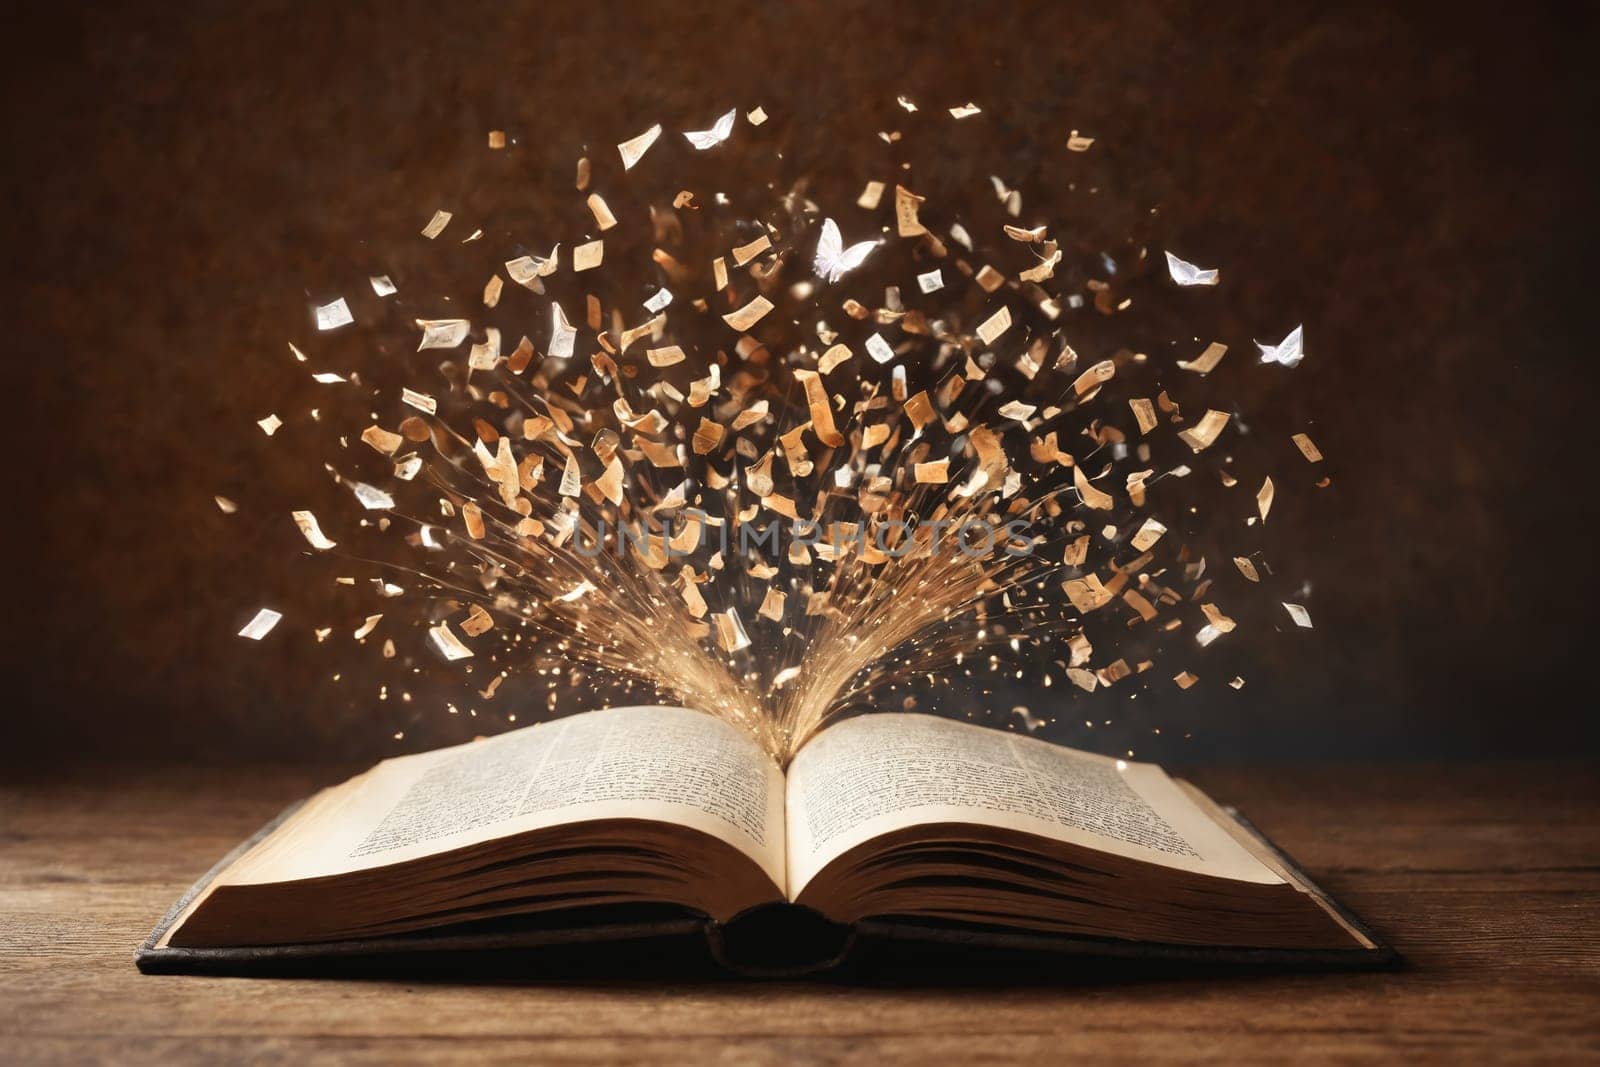 Dive into the world of fantasy and knowledge with this image of an old book stirring up a whirlwind of pages. Ideal for concepts related to literature, wisdom, or timeless beauty.